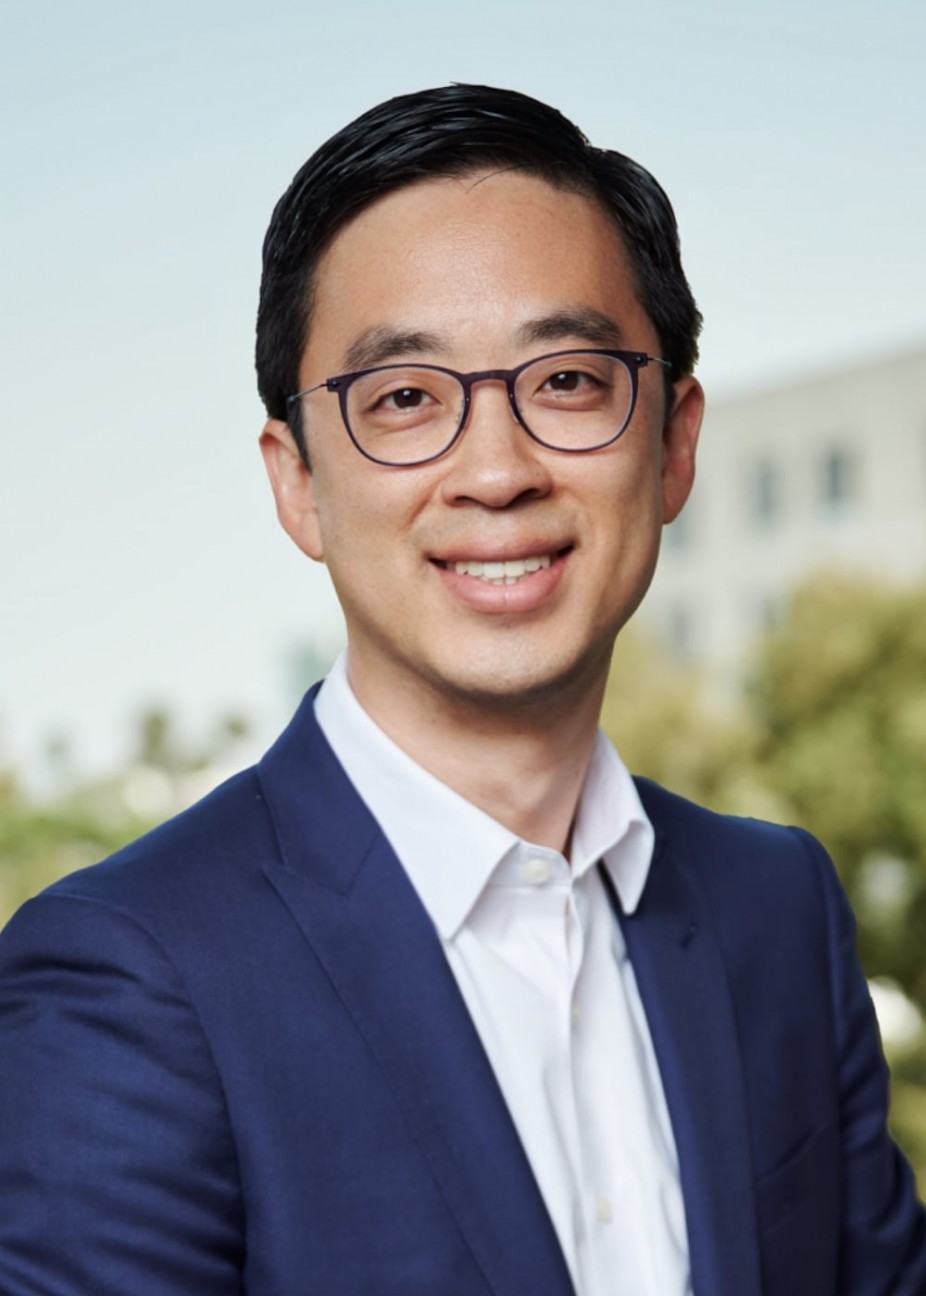 Ted Jeon – Levine Leichtman Capital Partners